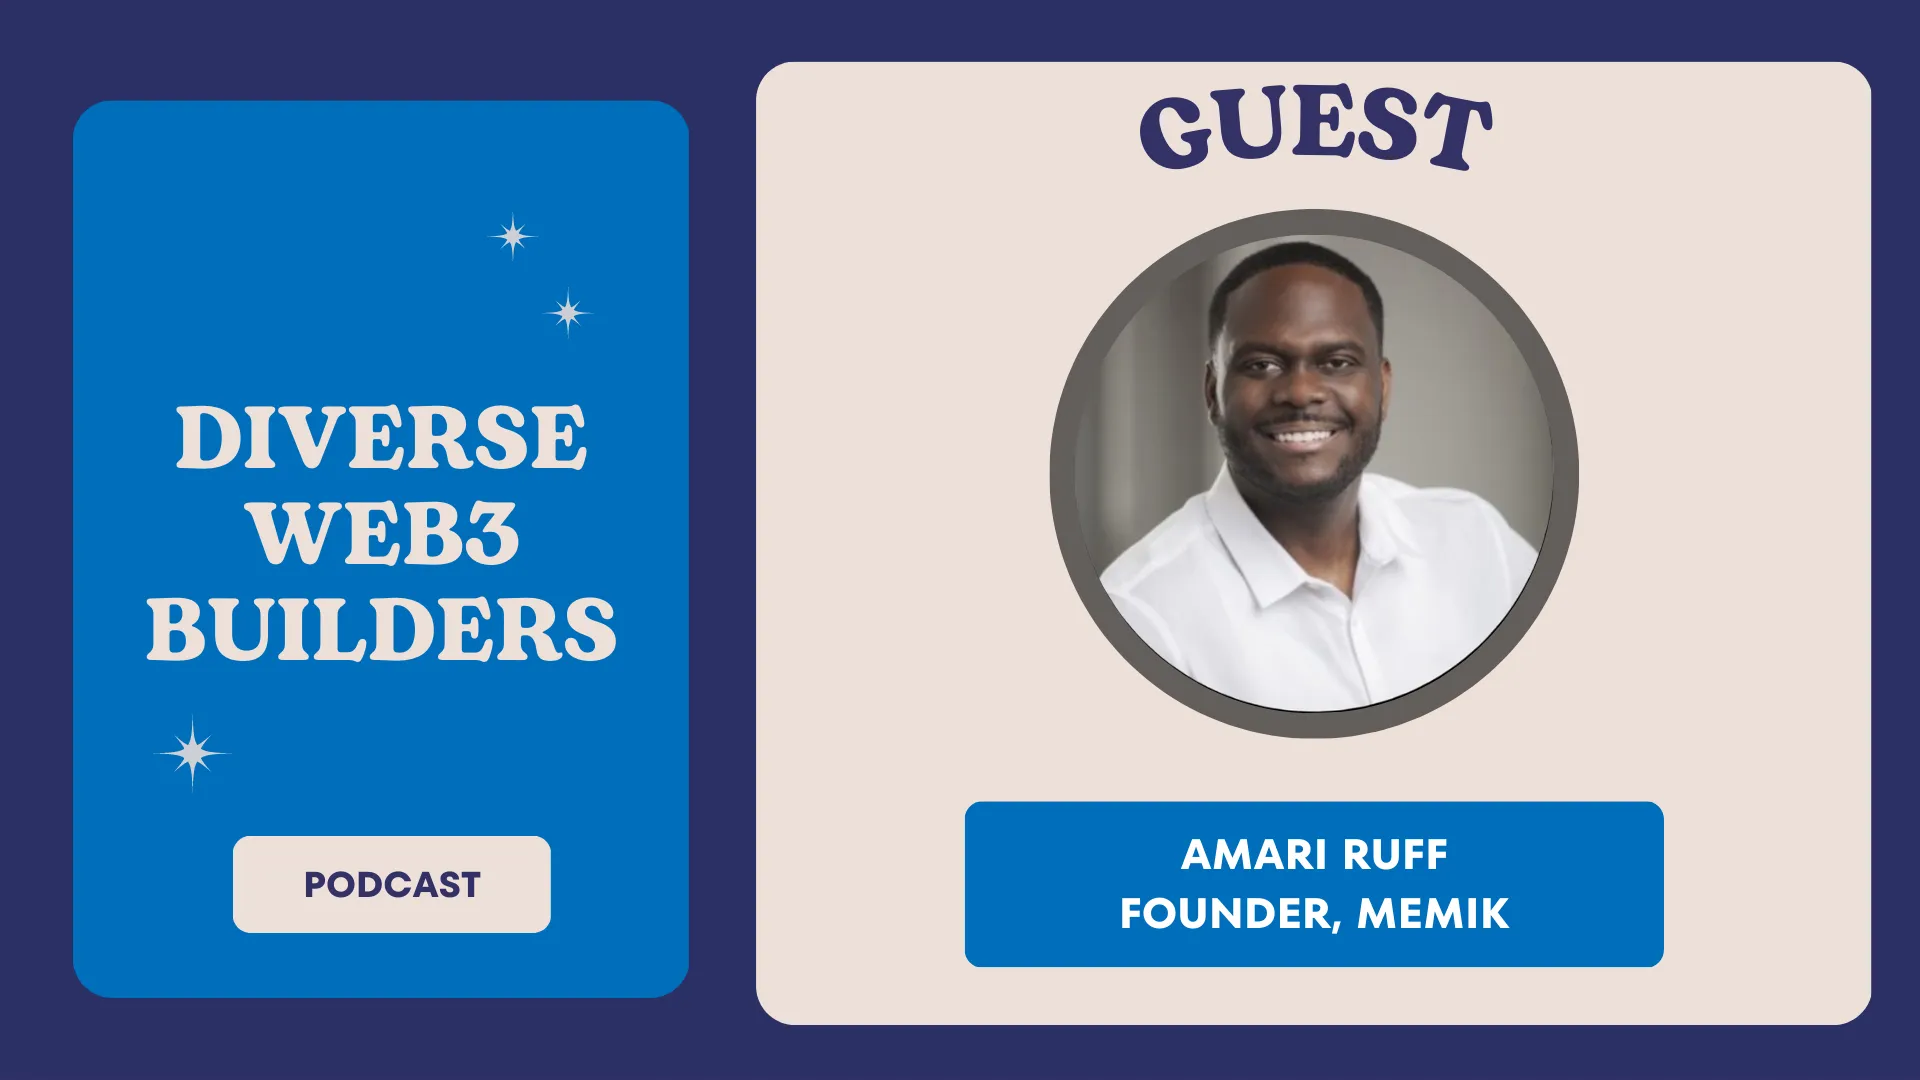 Amari Ruff is the founder of Memik.  Today on Diverse Web3 Builders, you can hear Amari’s story.  He’s  a serial entrepreneur with two exits.  Hear about the amazing AR avatar tech they have built at Memik that allows creators to build exciting experiences.  

https://www.linkedin.com/pulse/amari-ruff-memik-diverse-web3-builders-brian-zwerner/